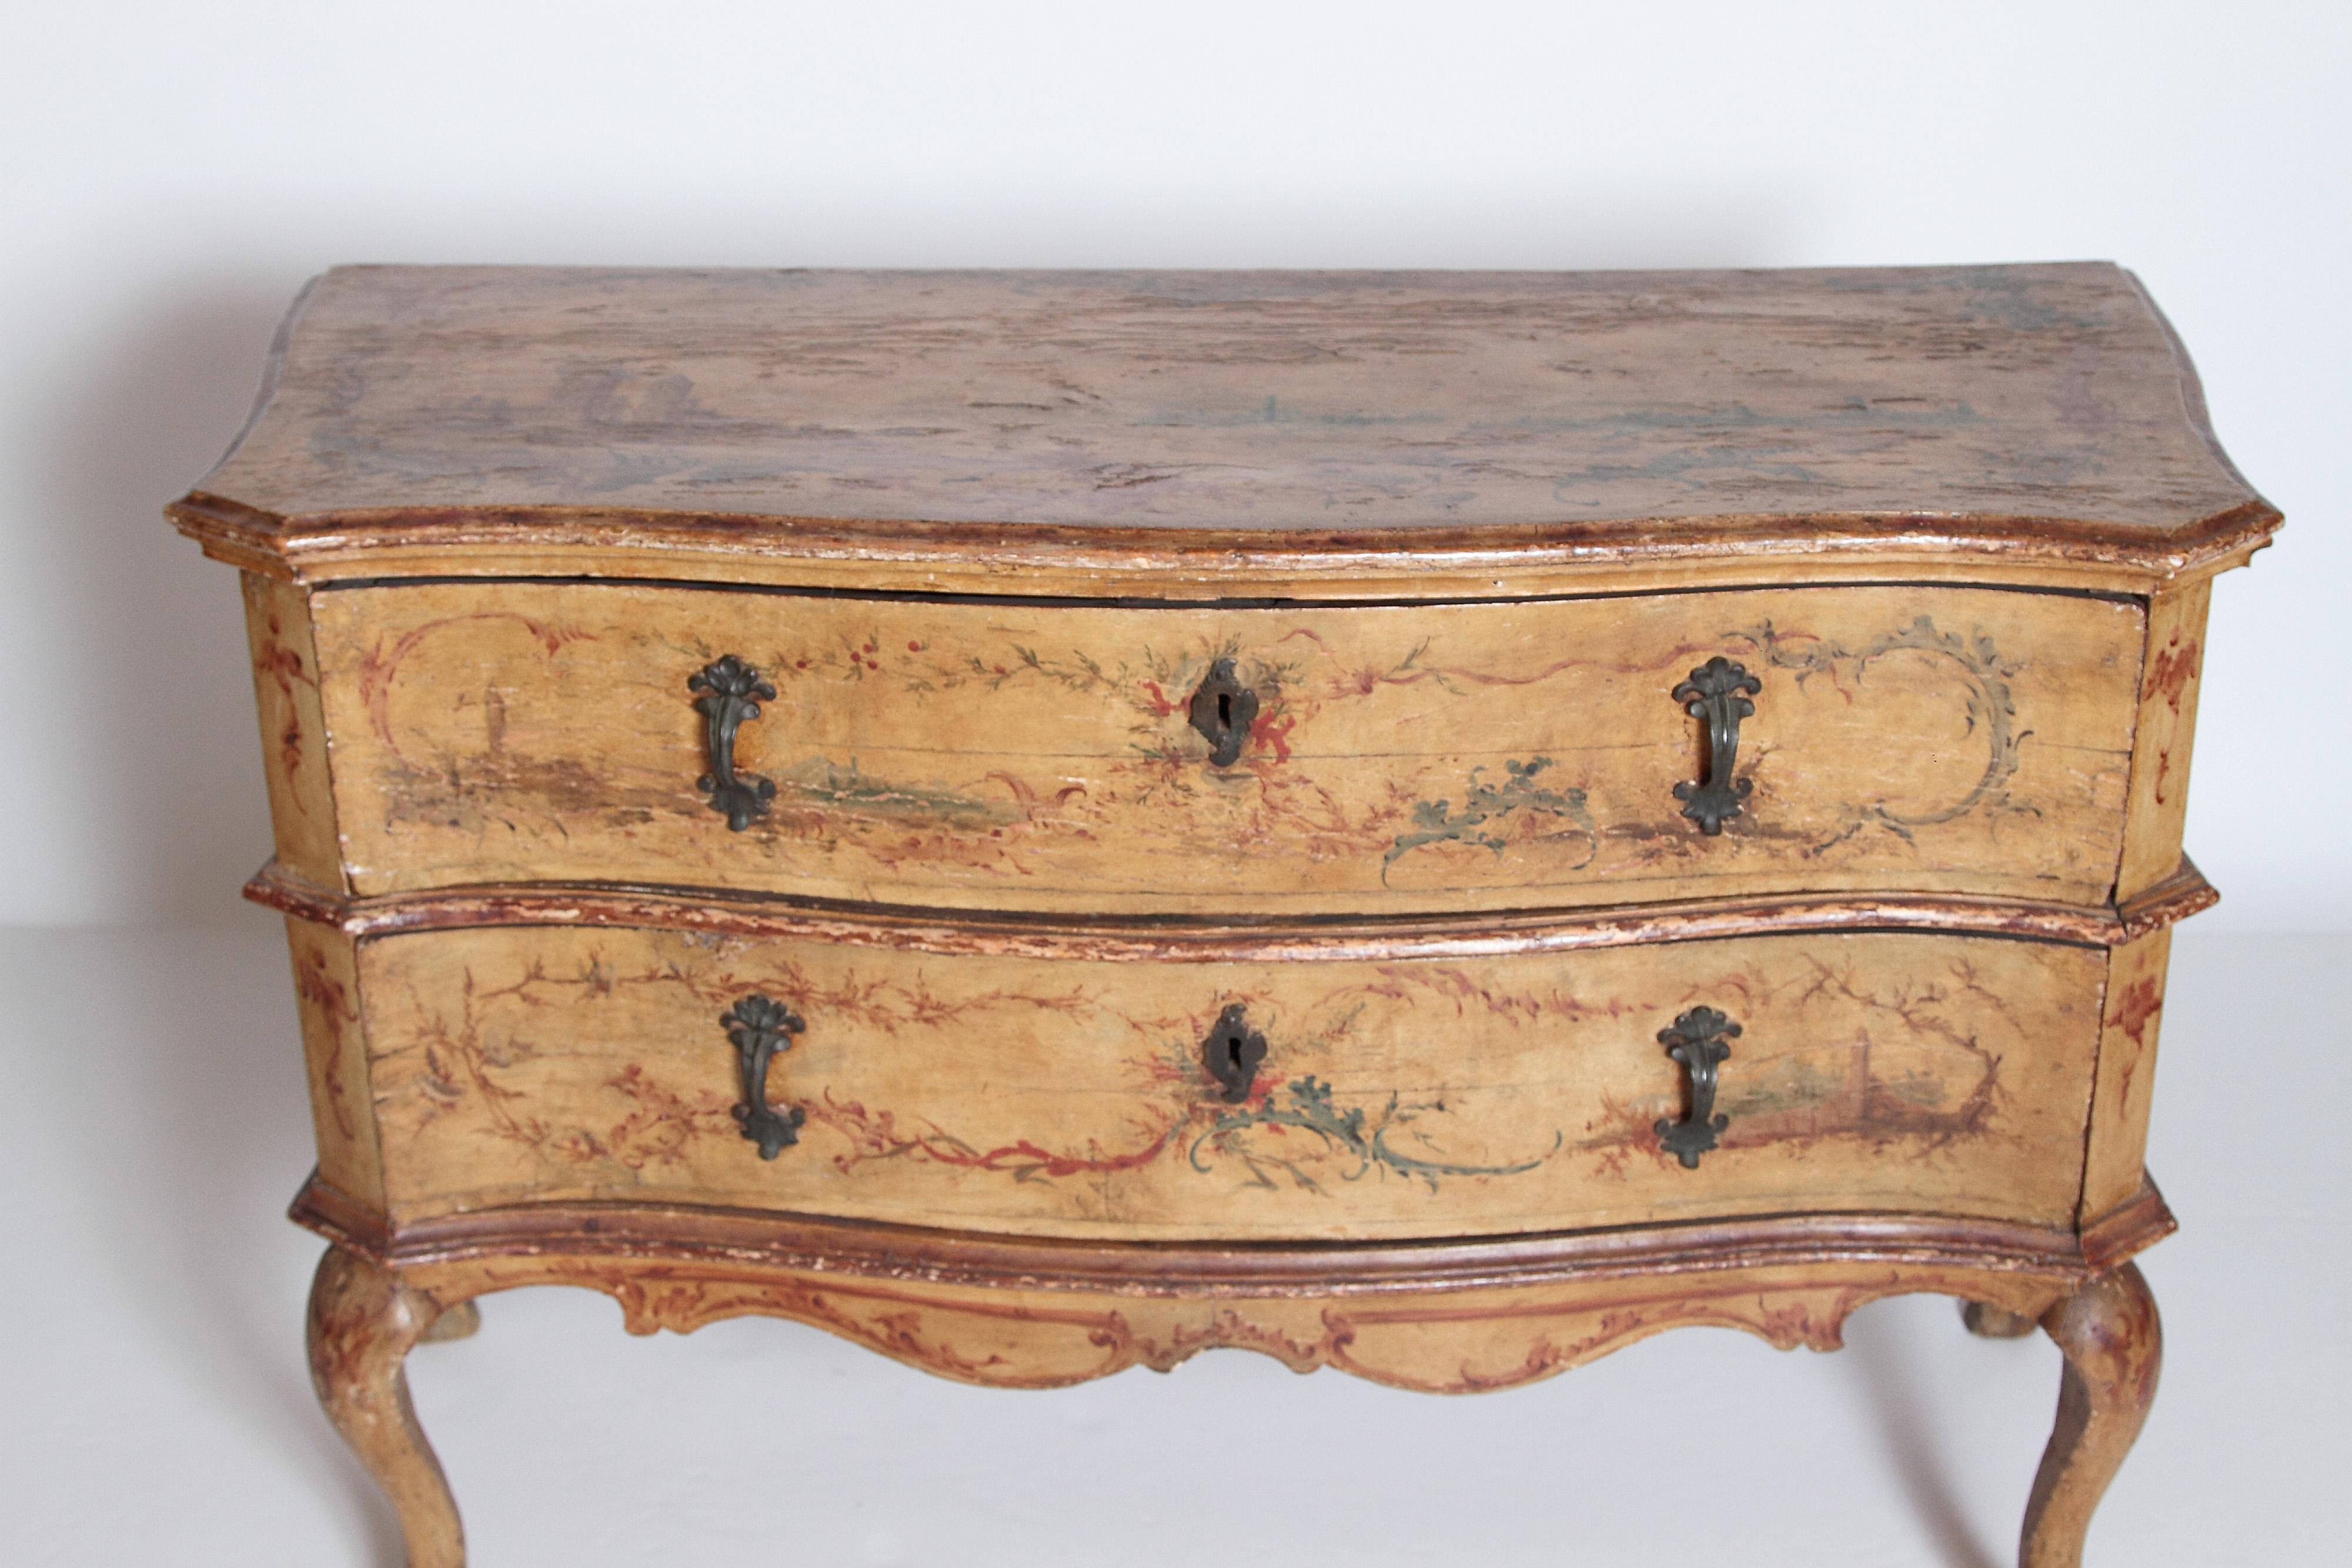 Mid-18th century Italian painted two-drawer commode with floral decoration. A serpentine molded top with canted sides and shaped front over double stacked drawers. Each drawer has two metal floral pulls and a key hole. A scalloped stretcher is